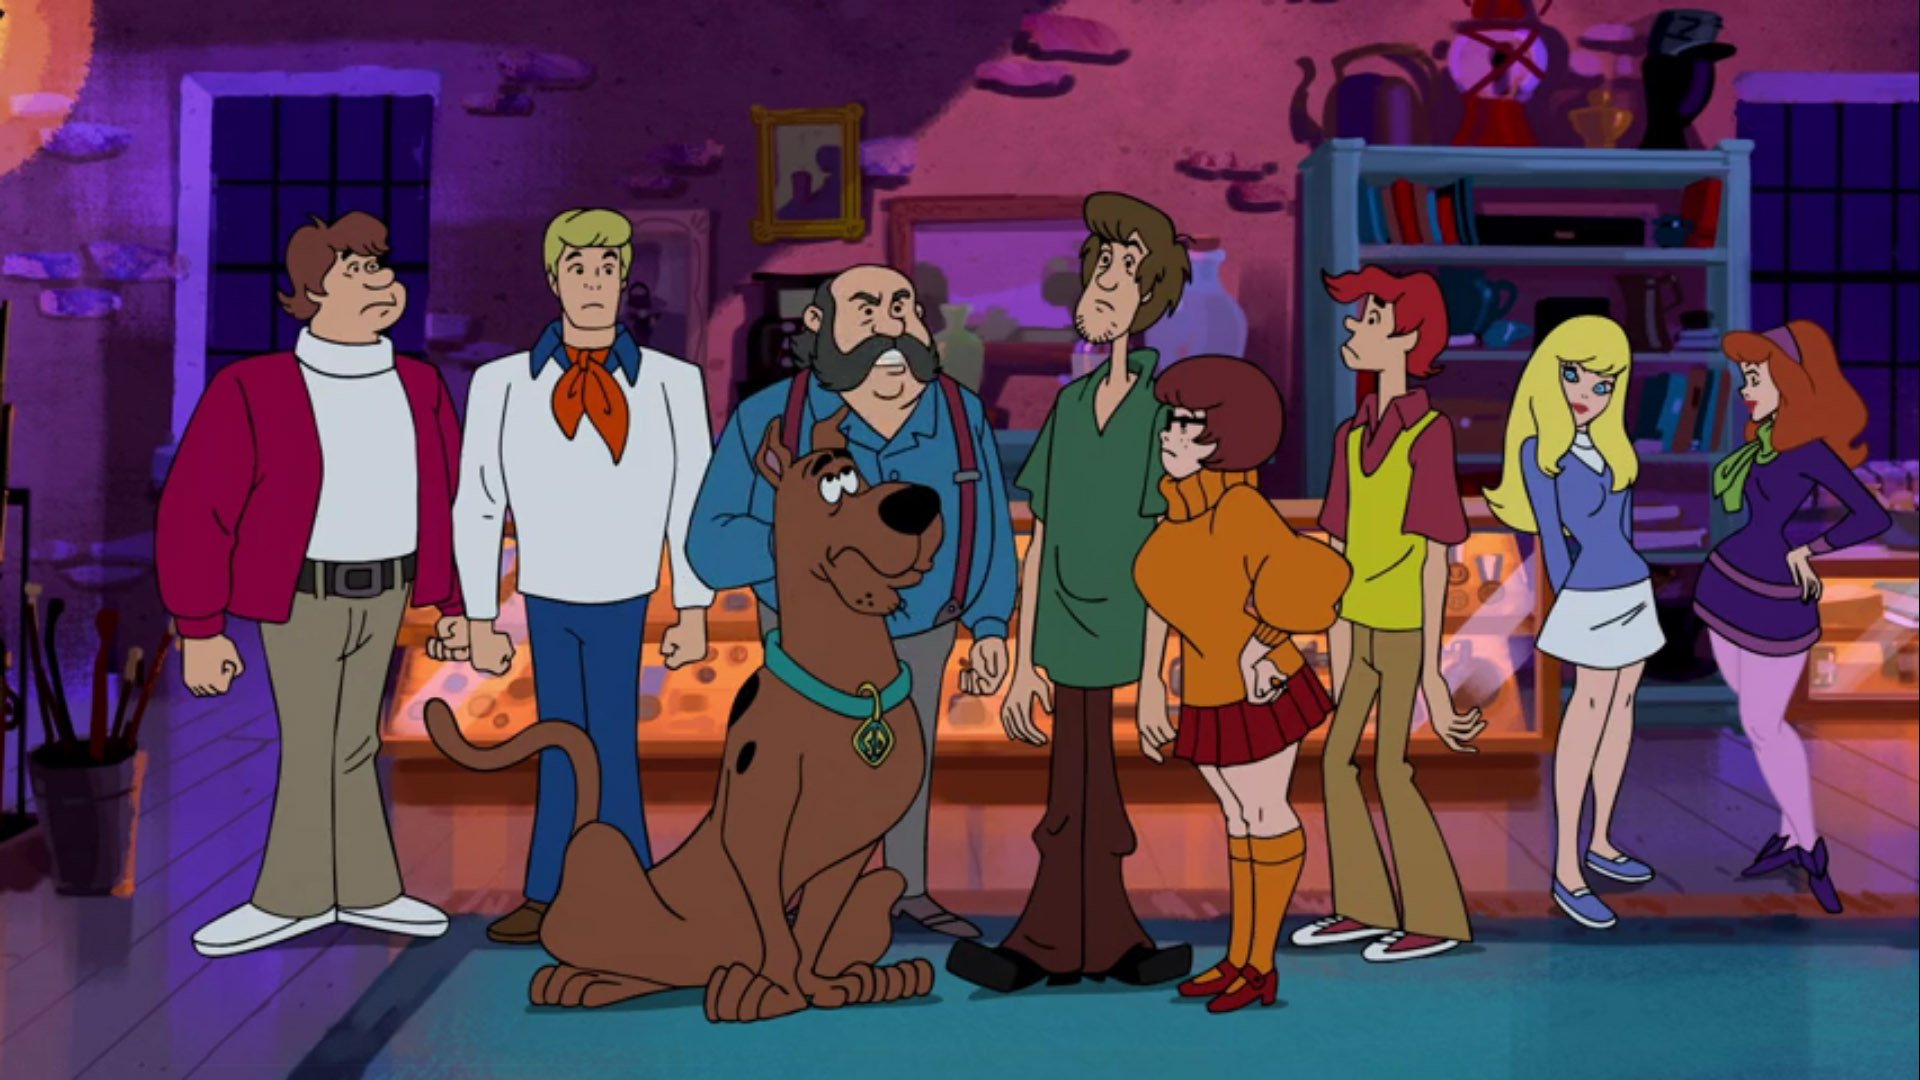 “I'm watching Scooby-Doo and Guess Who? 